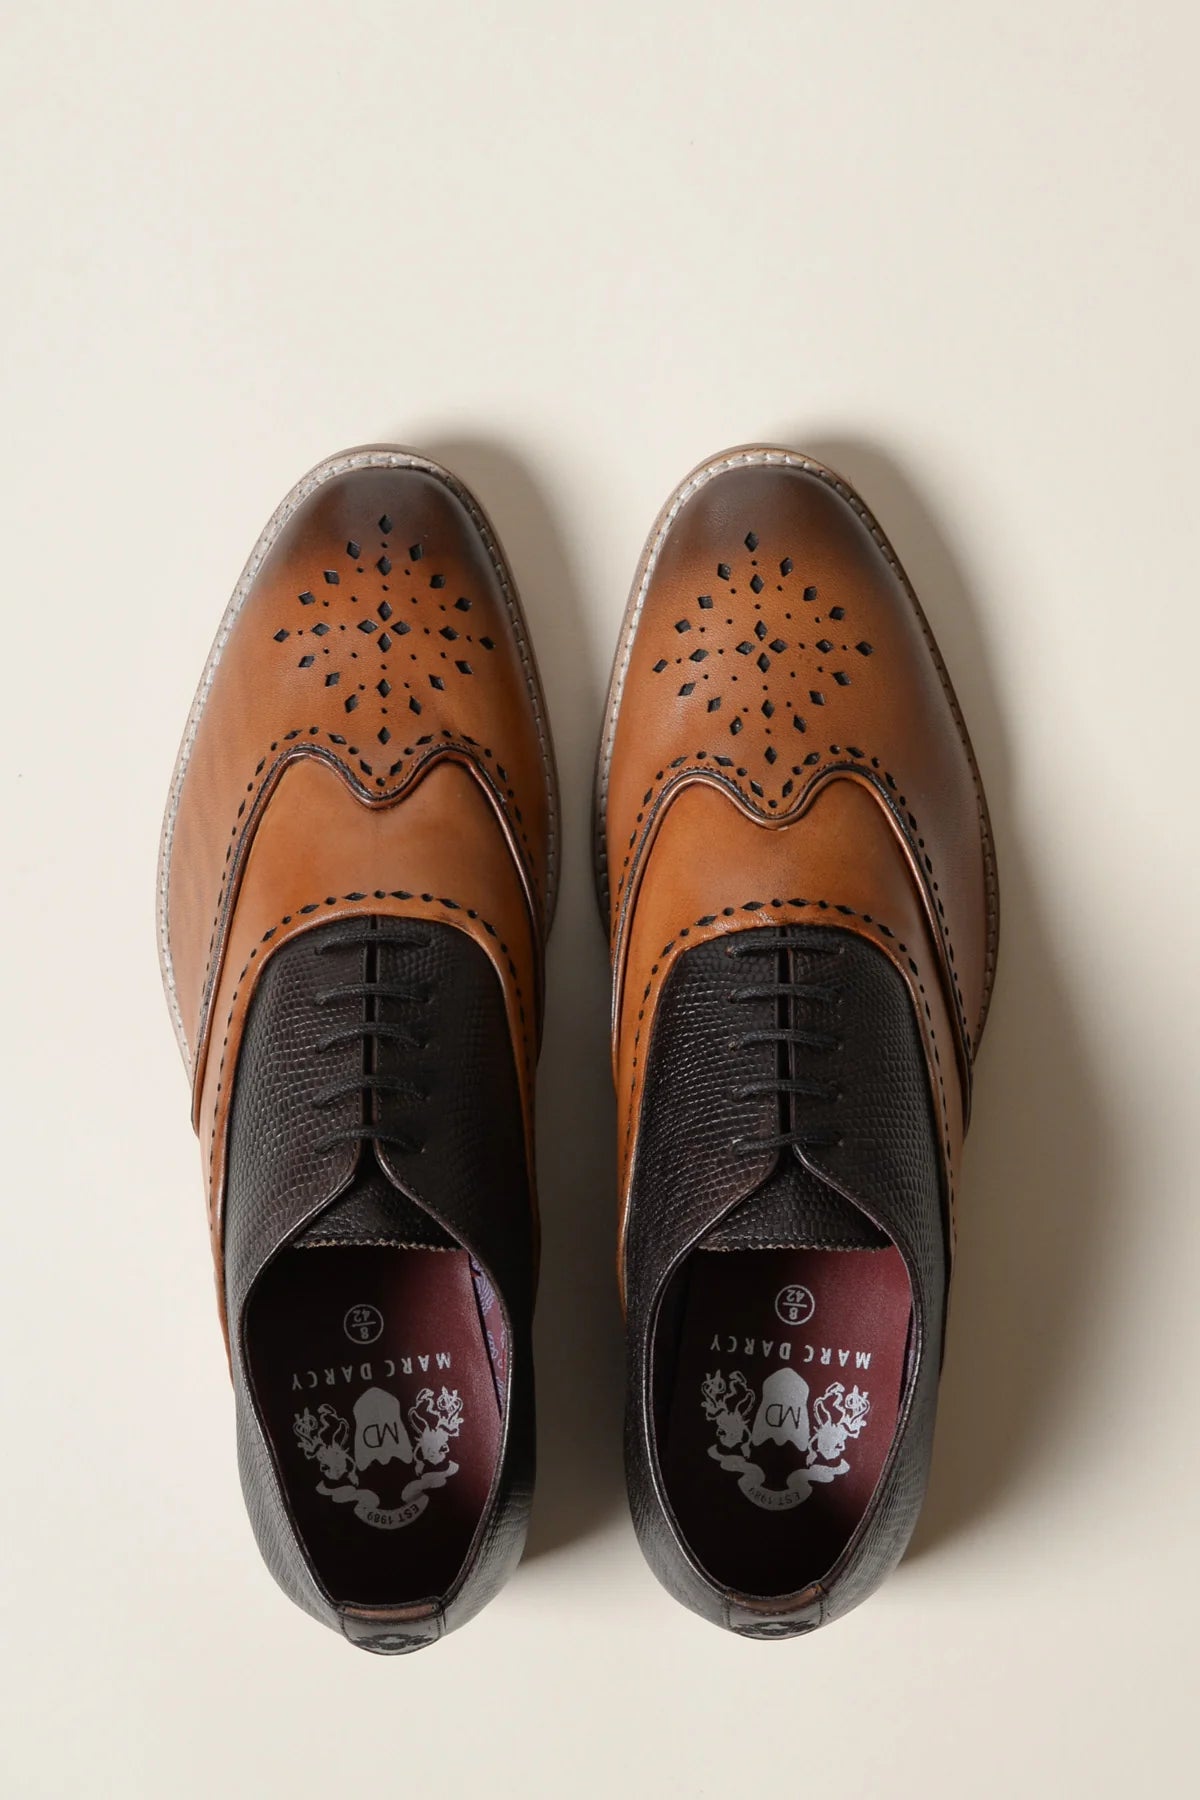 Brown leather shoes, Marc Darcy Ryan - Wingtip brogue